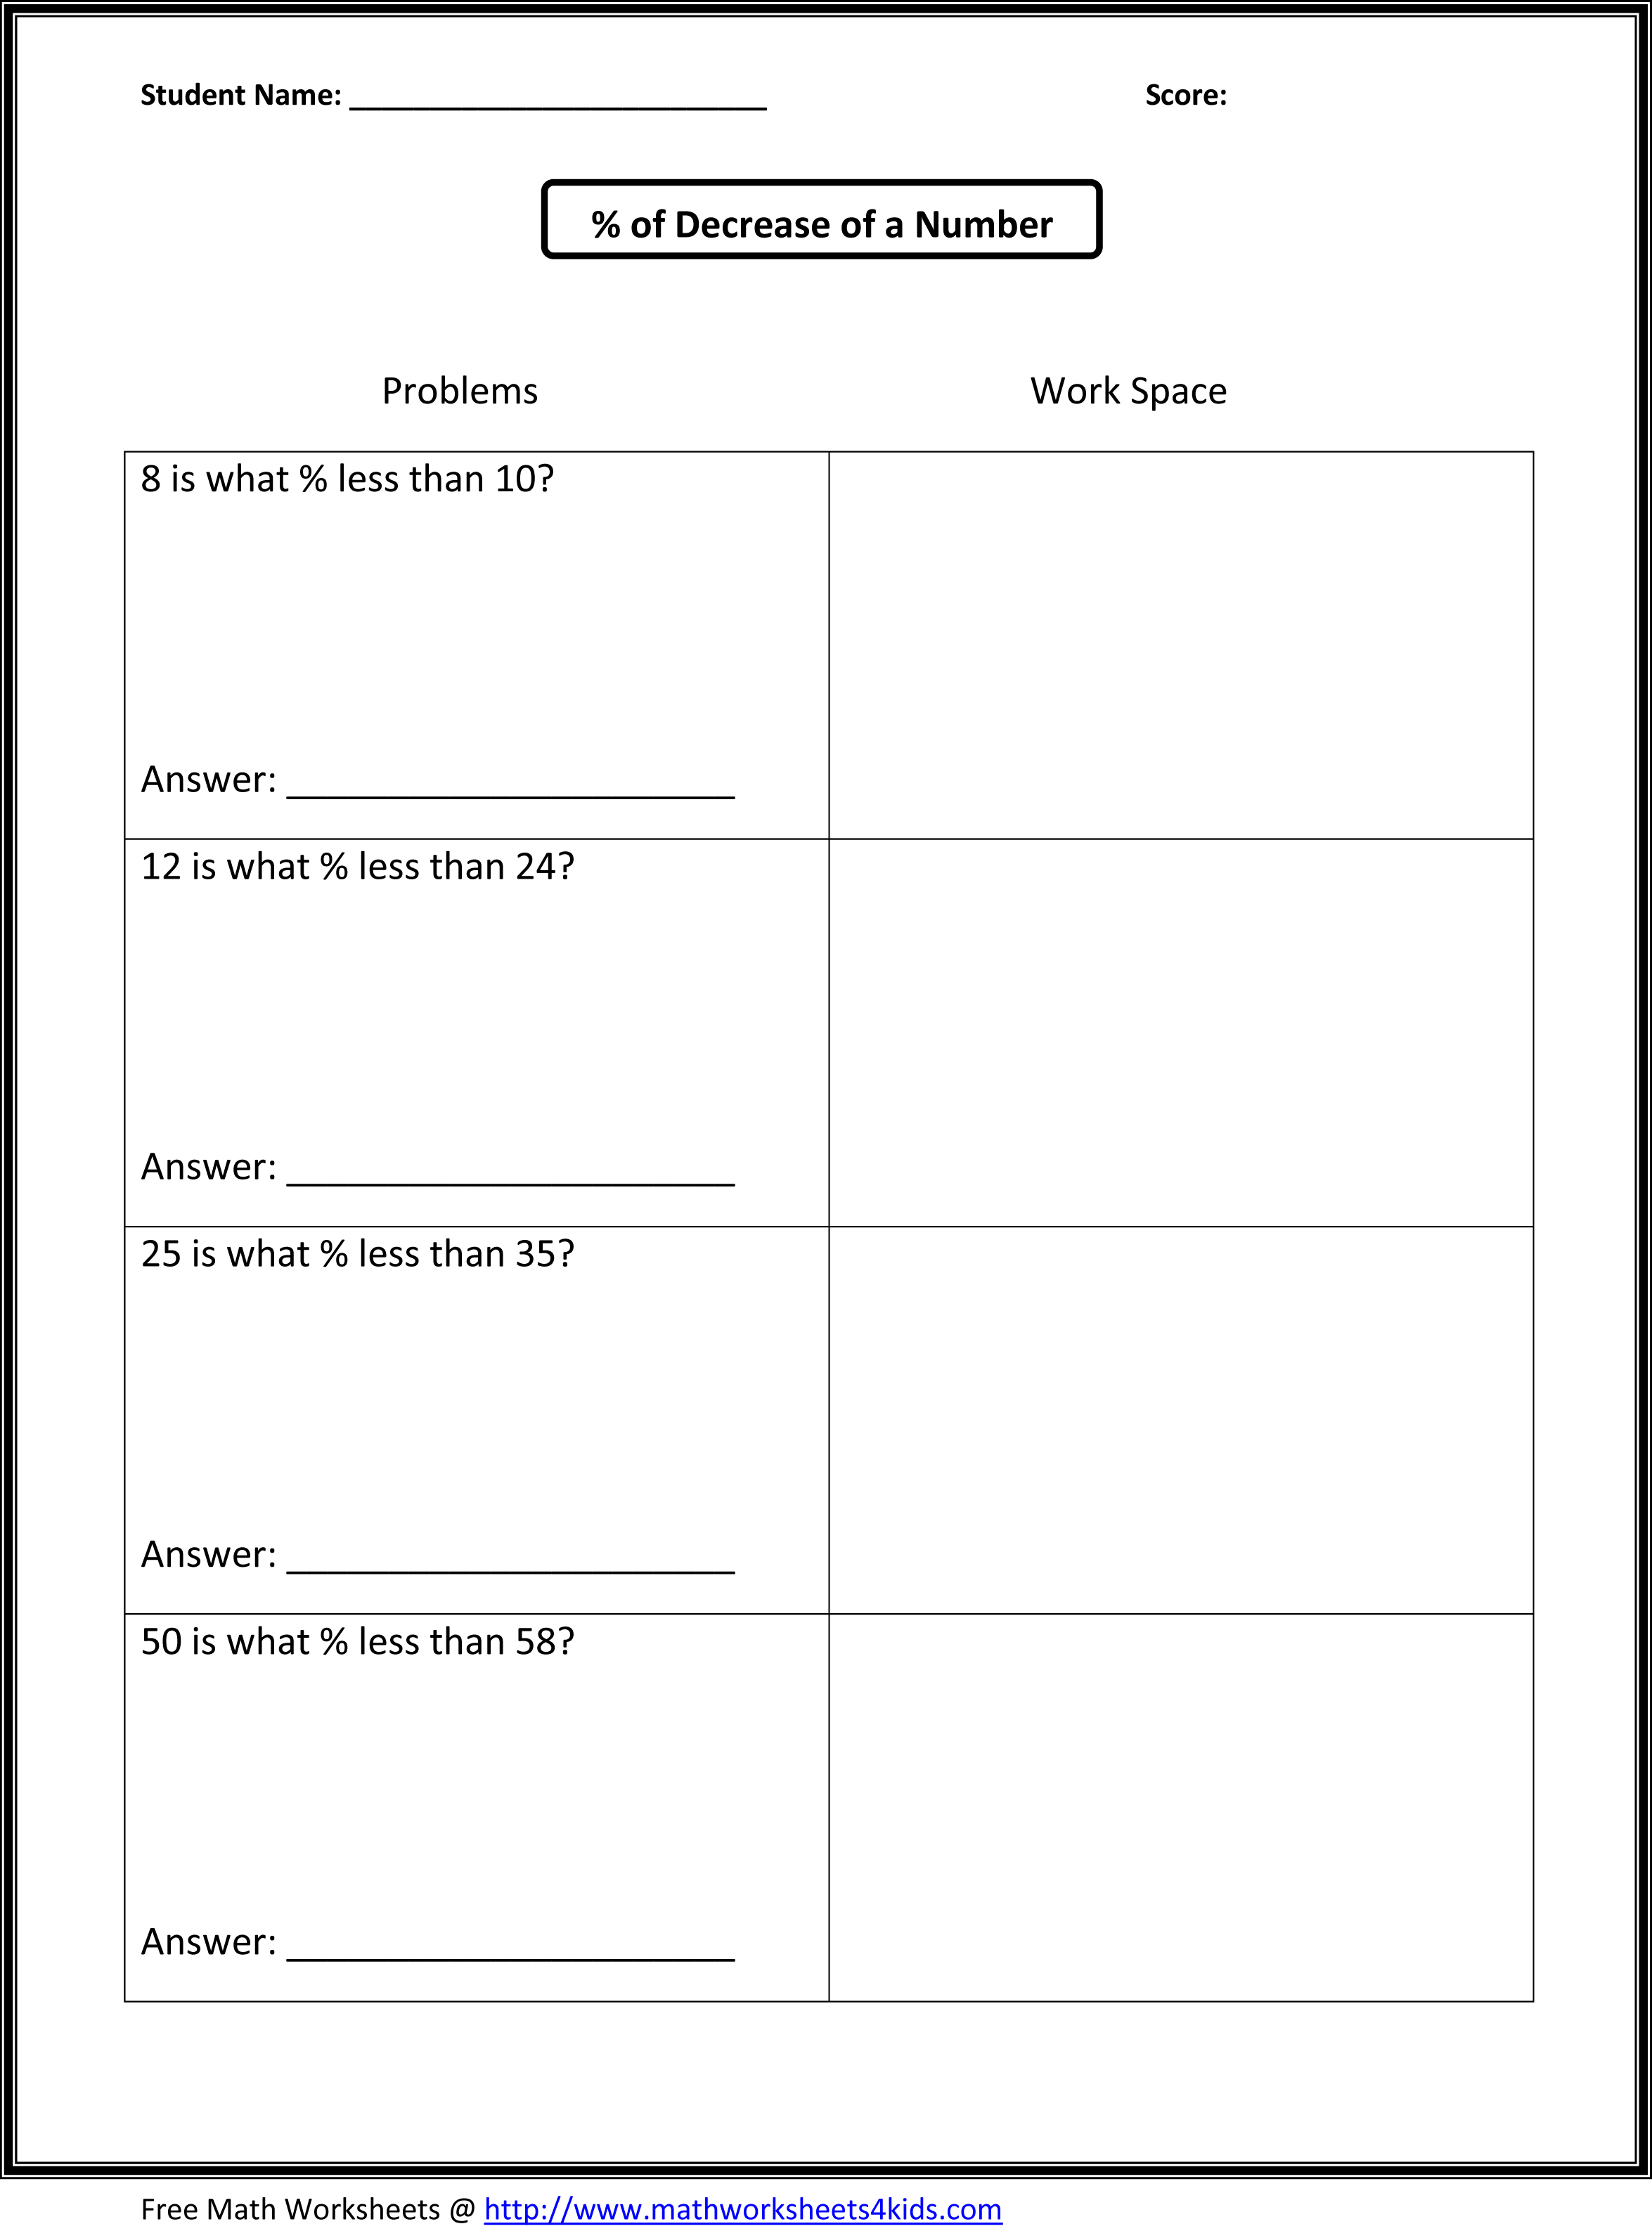 10 Best Images of 7th Grade Math Worksheets With Answer Key - 7th Grade